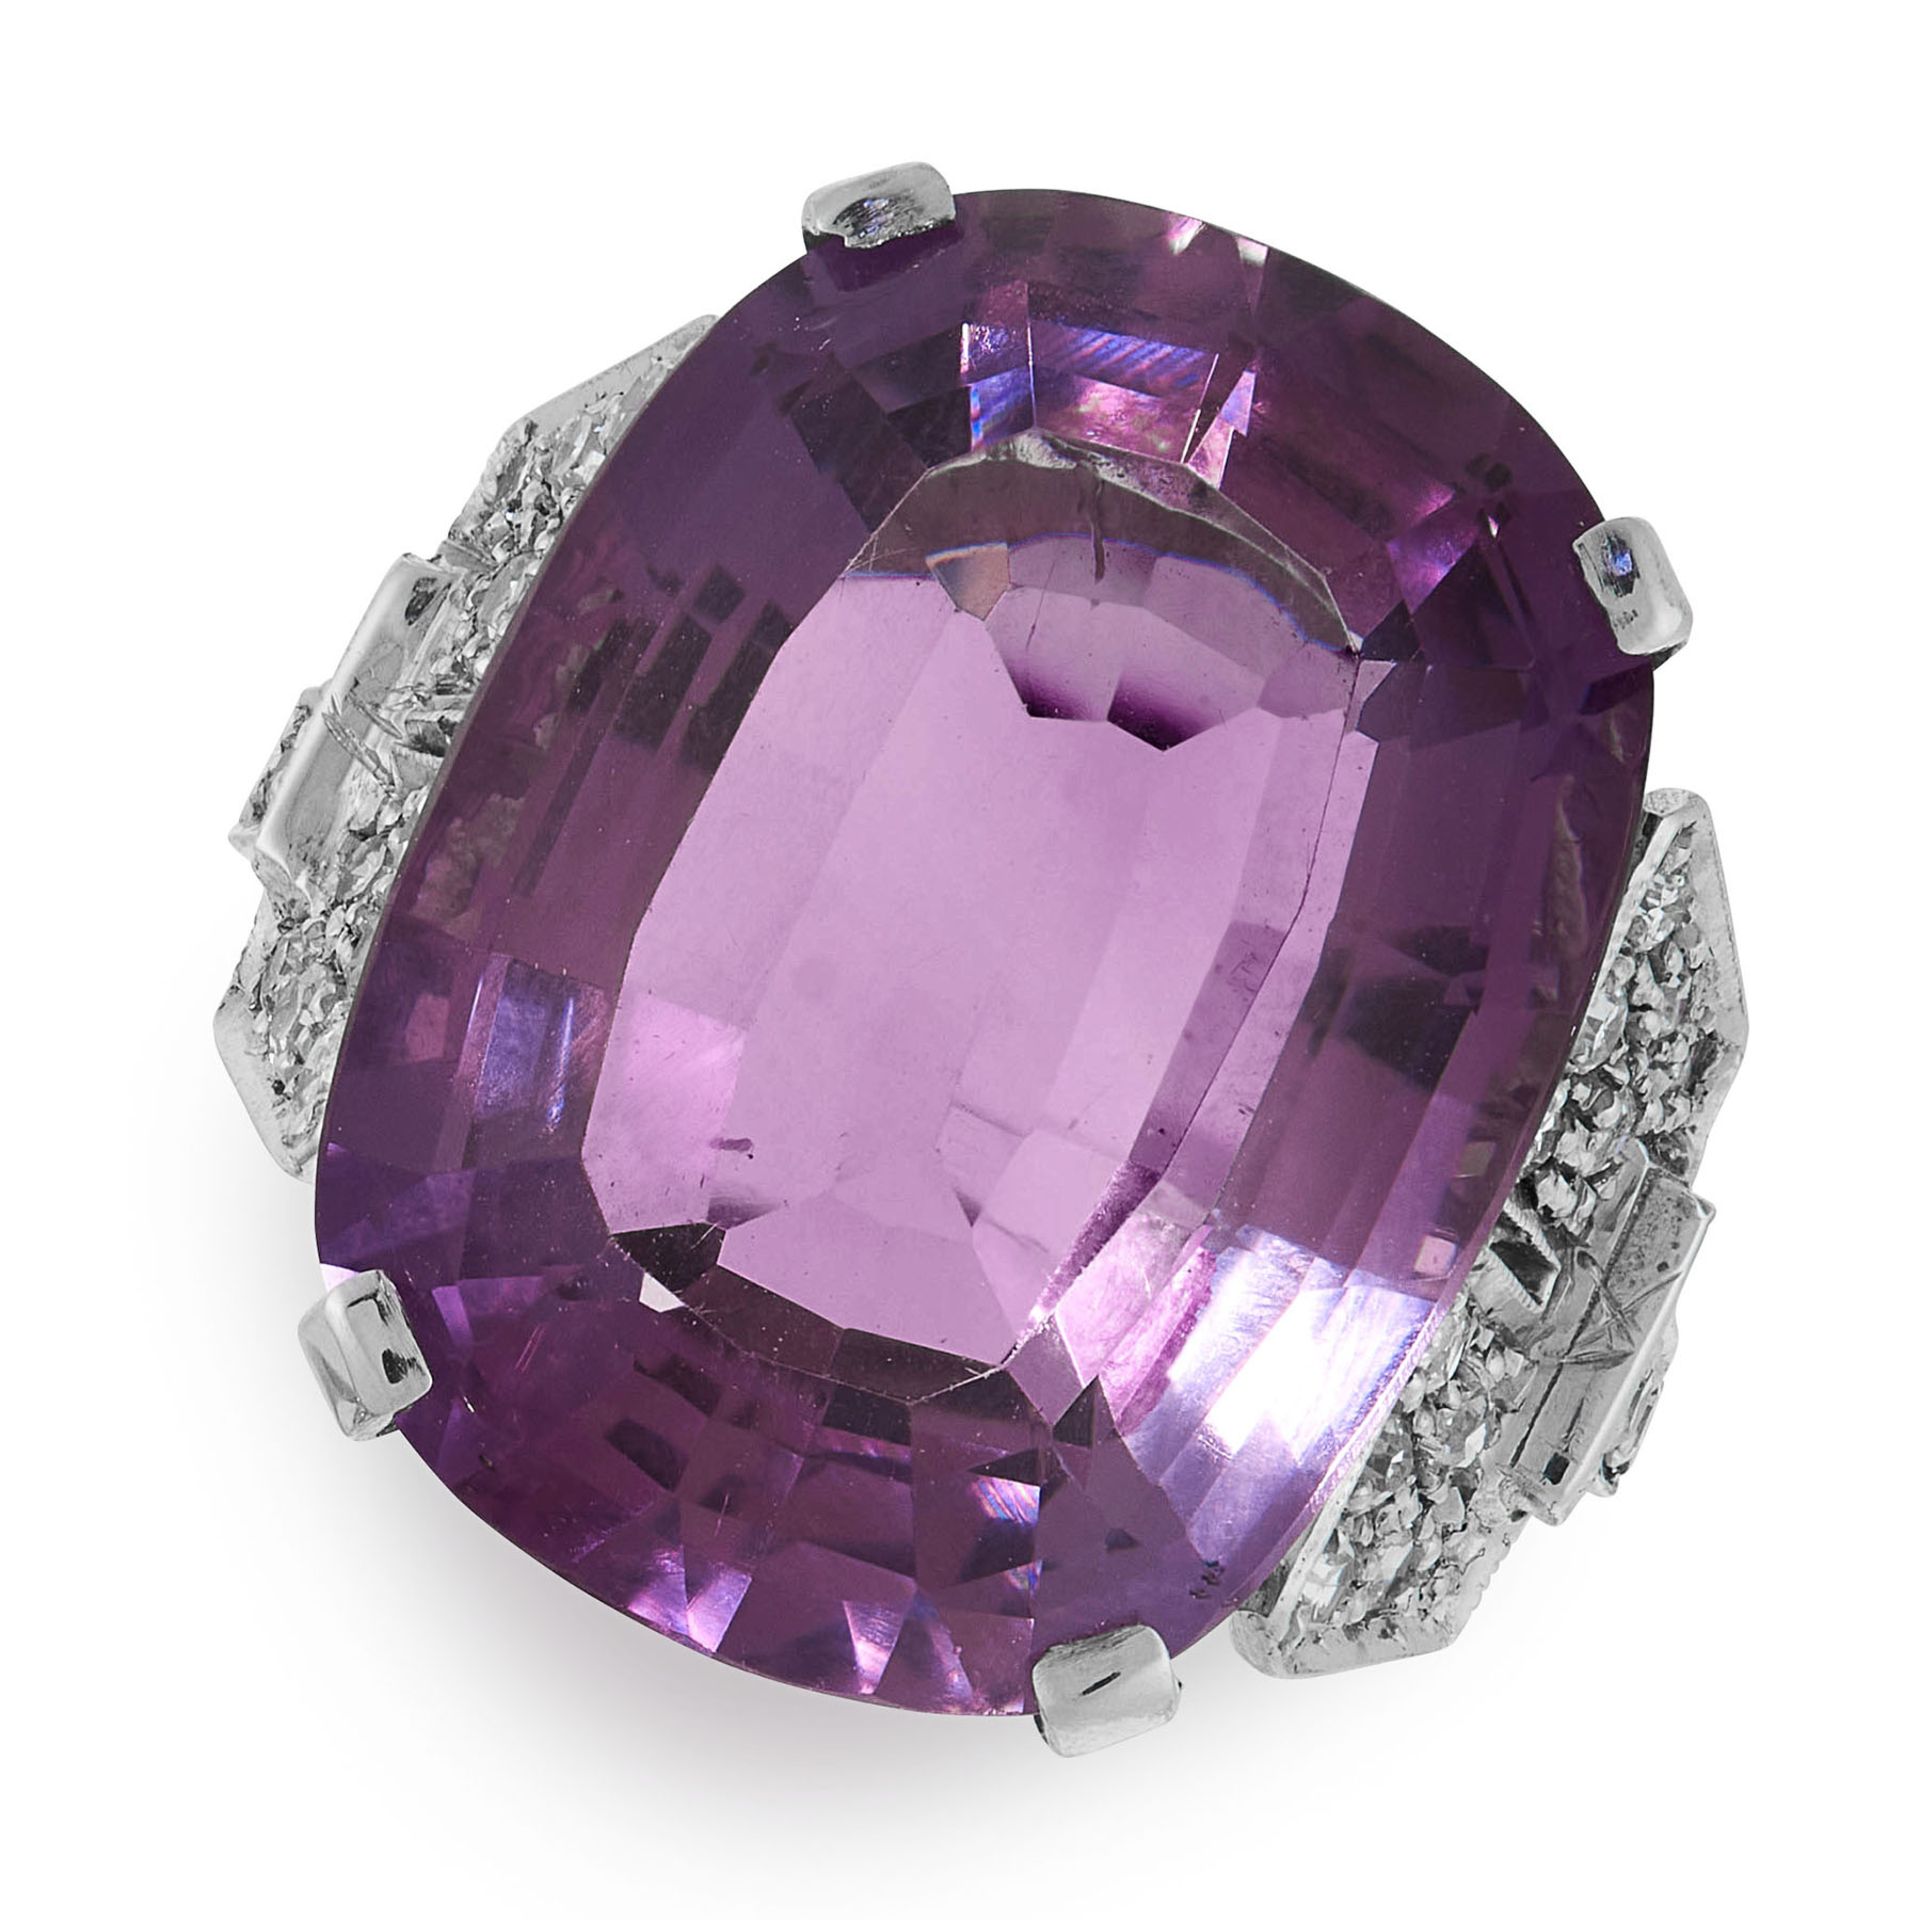 AN AMETHYST AND DIAMOND DRESS RING in 18ct white gold, set with a cushion cut amethyst of 16.59